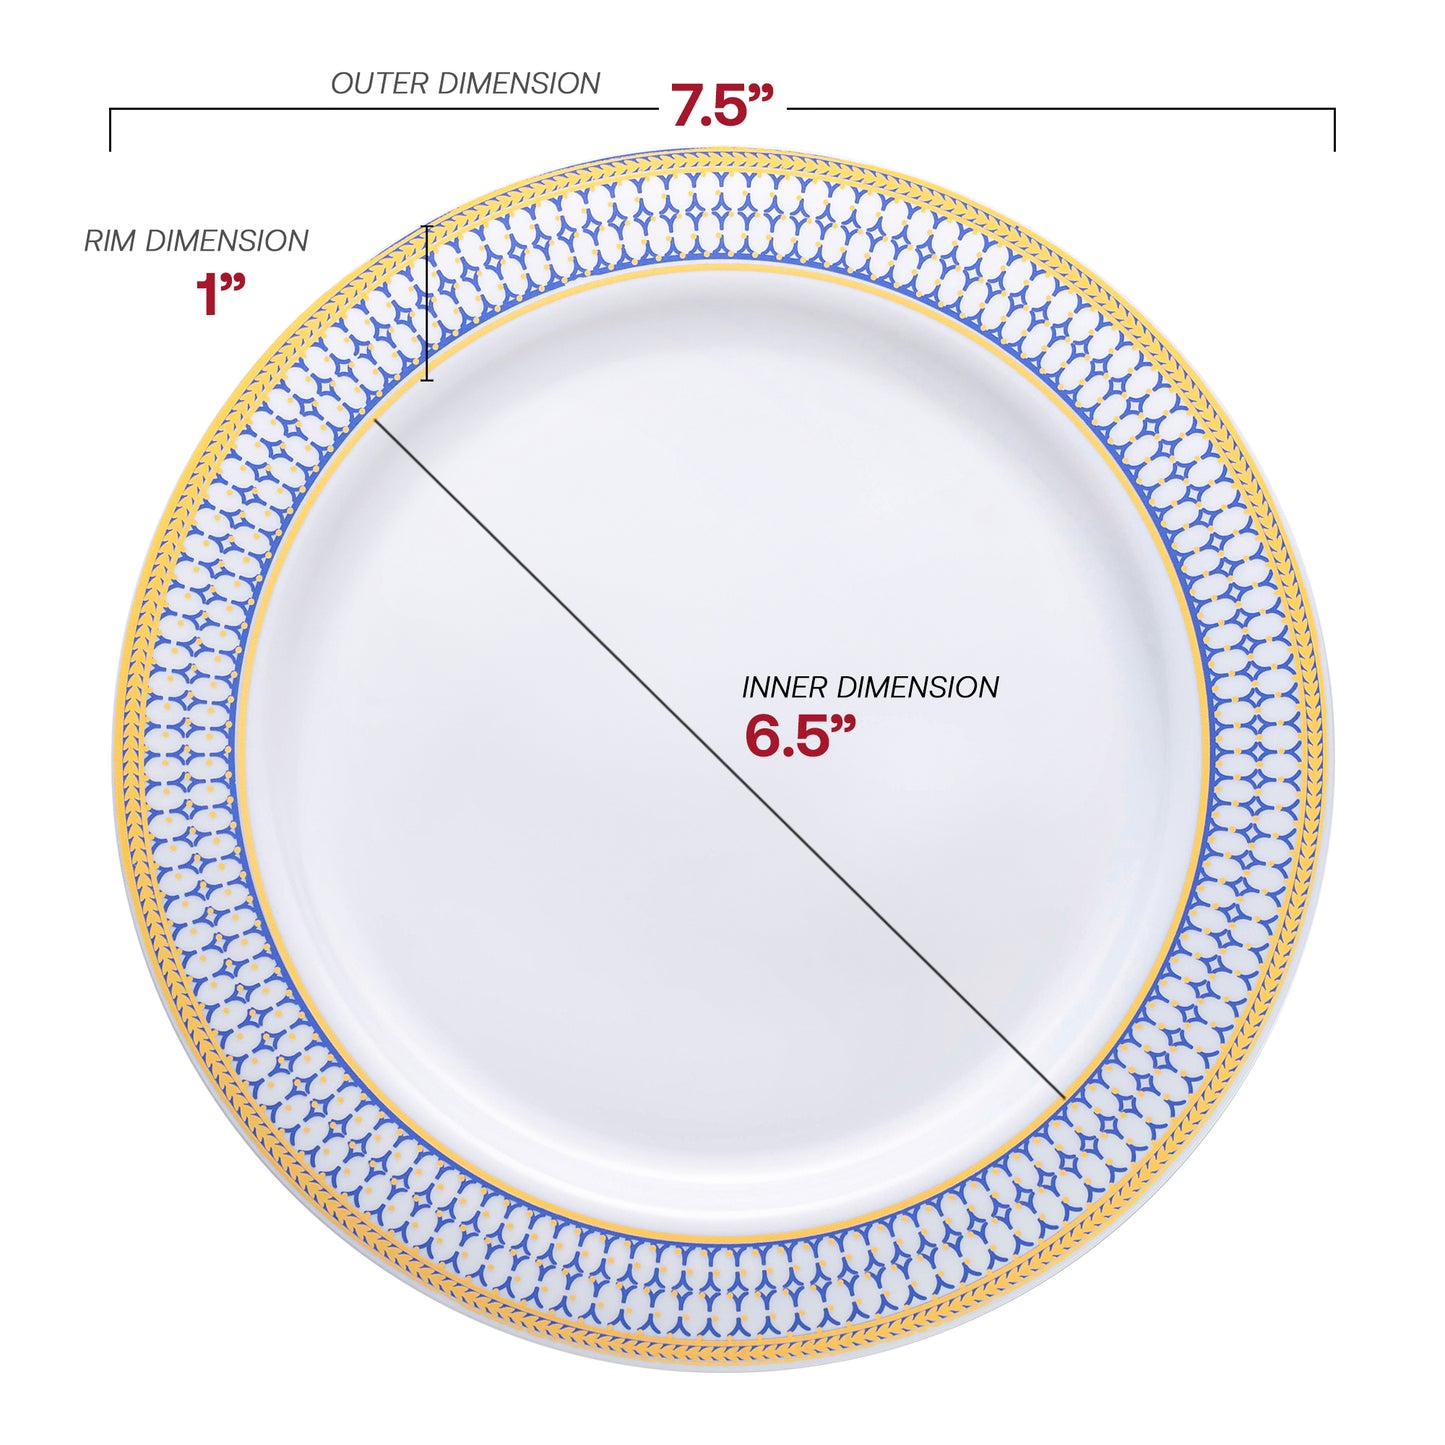 White with Blue and Gold Chord Rim Plastic Appetizer/Salad Plates (7.5") Dimension | The Kaya Collection